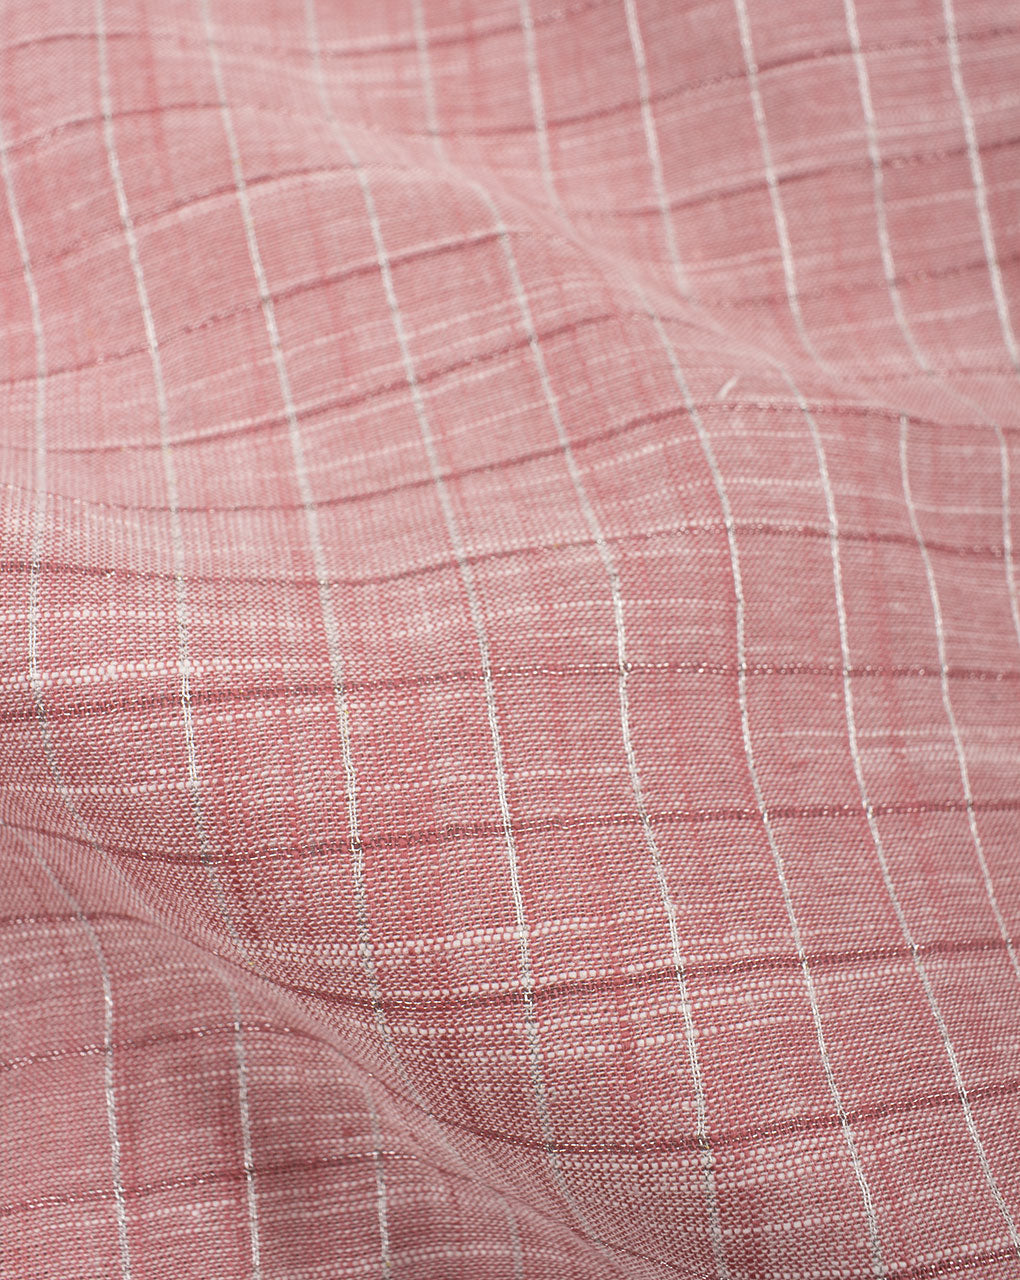 Pink Silver Stripes Pattern Woven Loom Textured Cotton Fabric - Fabriclore.com